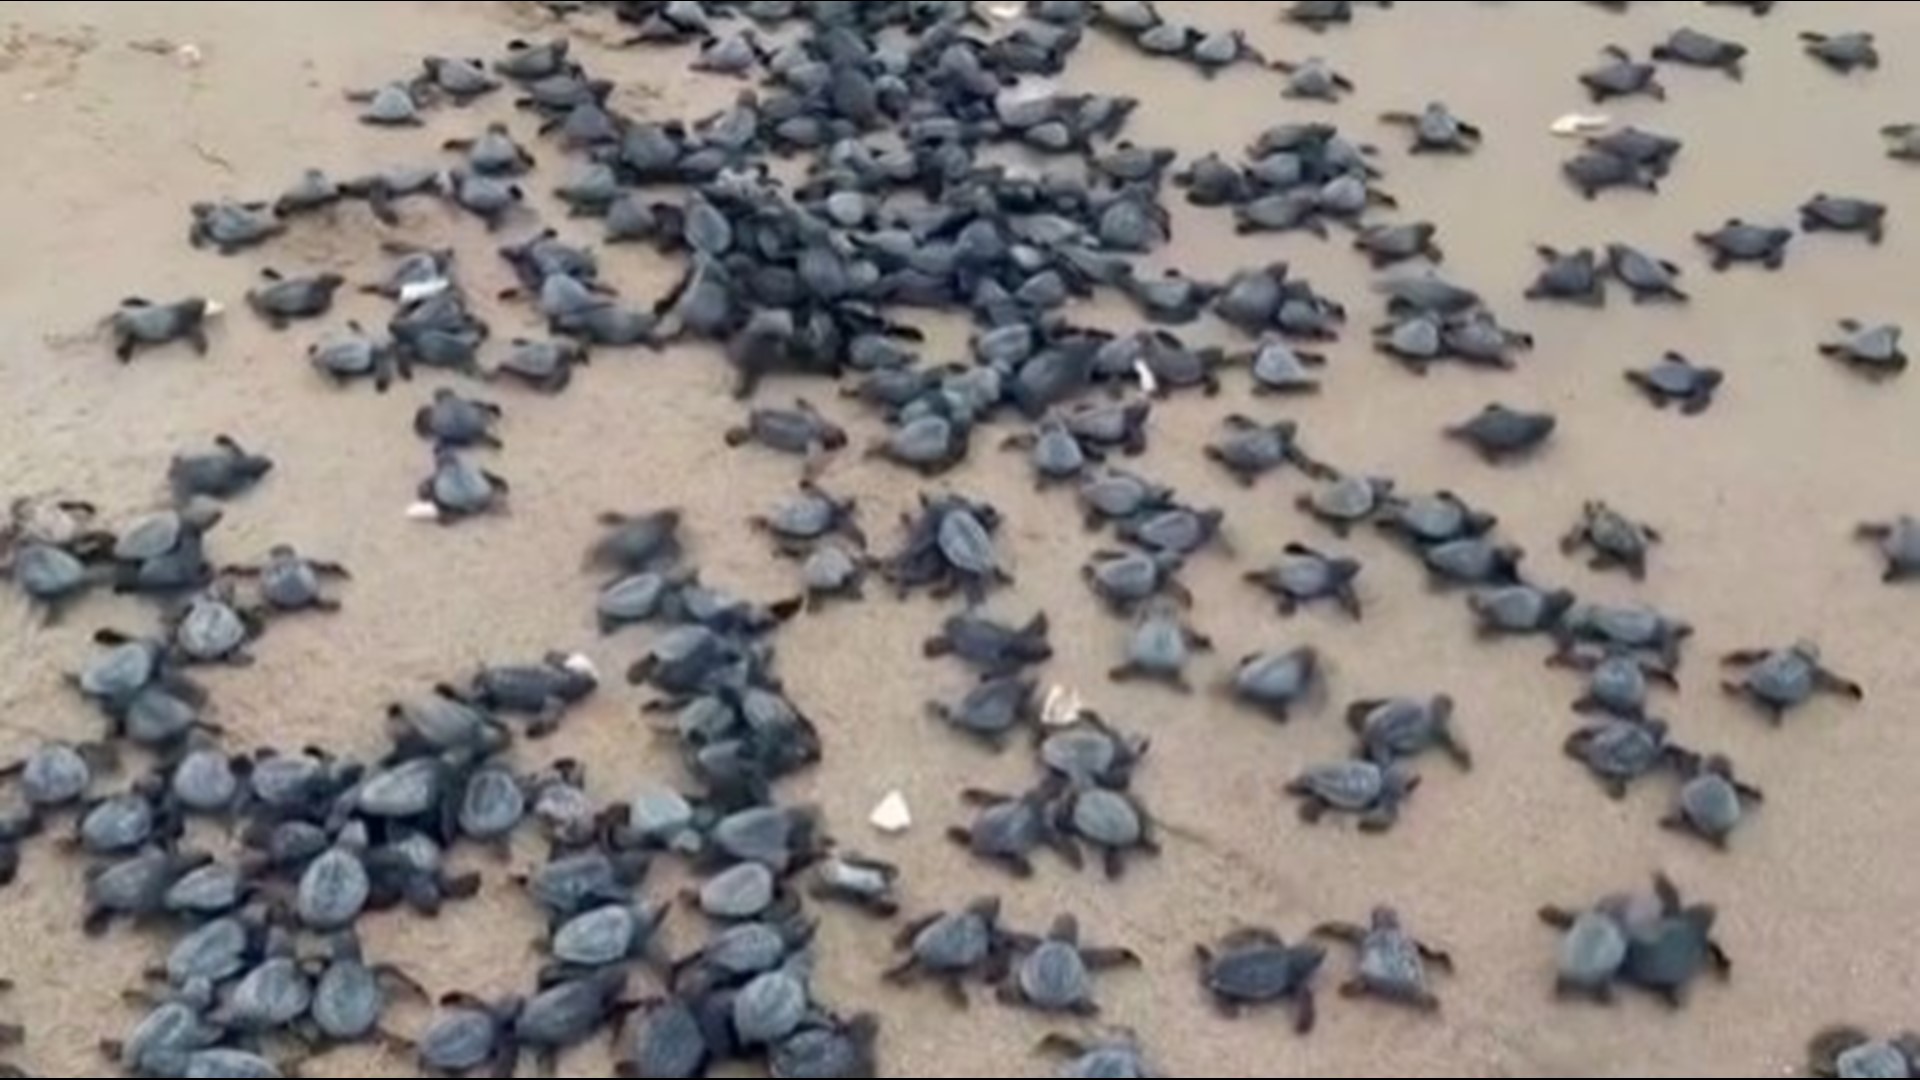 Millions of baby Olive Ridley turtles stormed the waters after hatching on a virtually deserted beach in India. Buzz60's Sean Dowling has more.